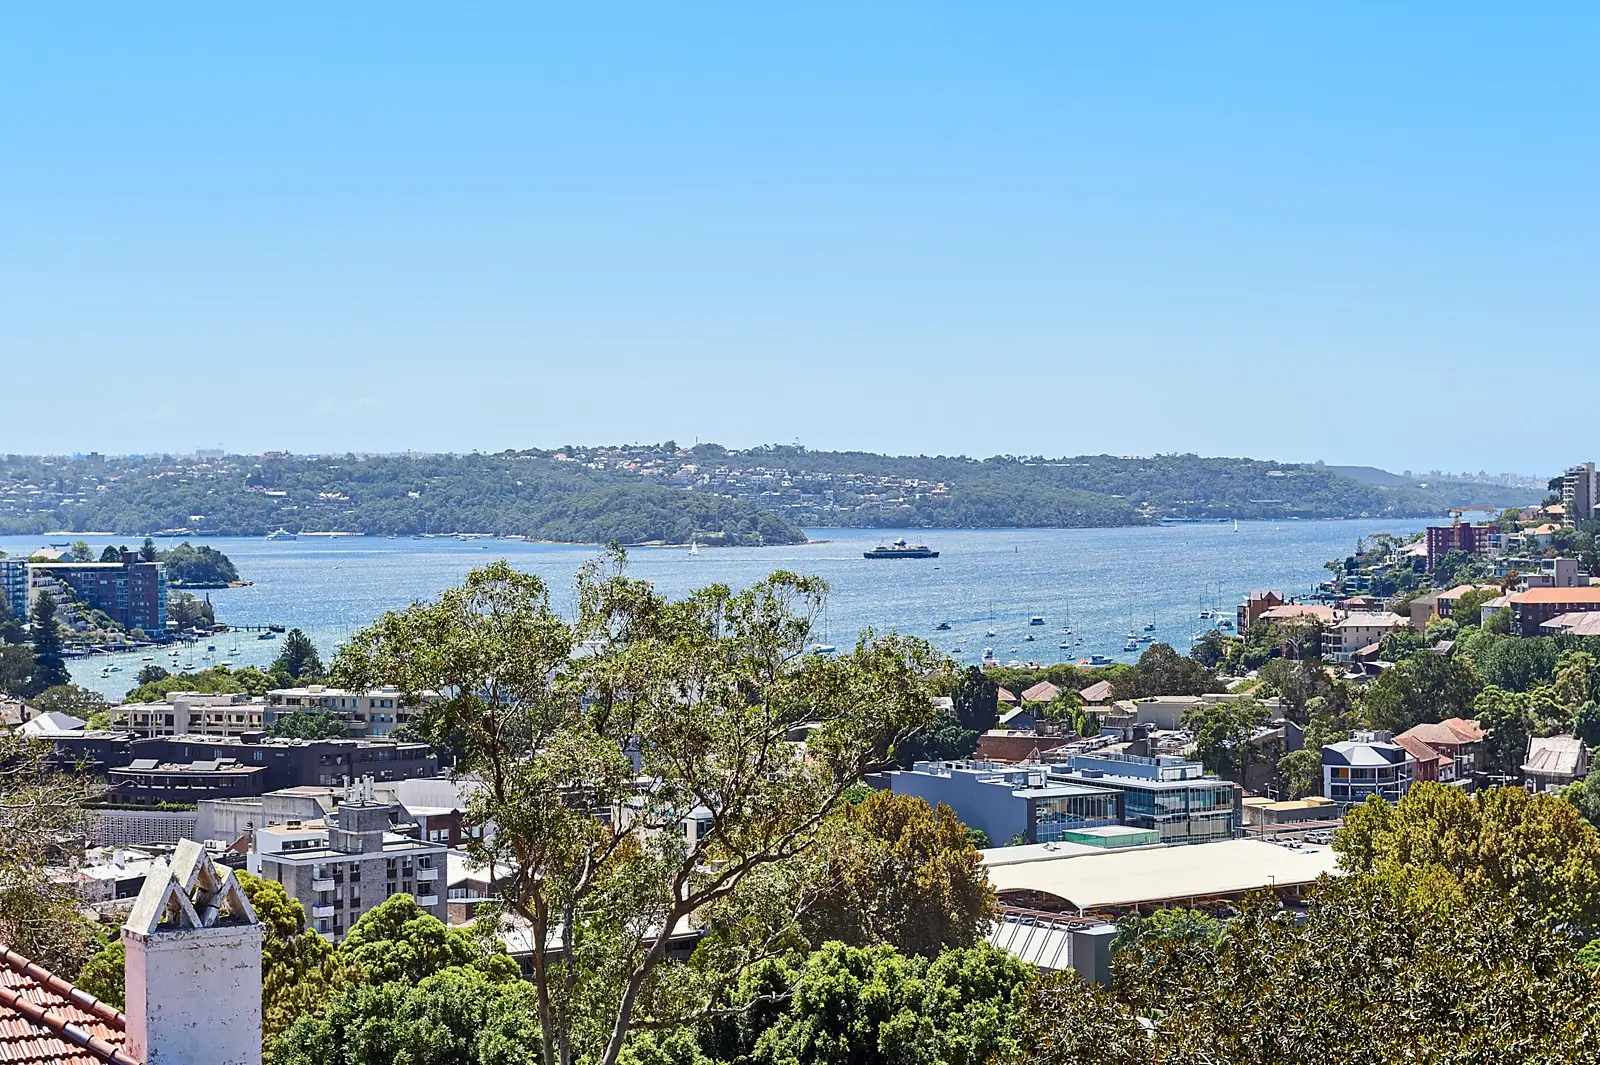 Photo #1: 22/321 Edgecliff Road, Woollahra - Sold by Sydney Sotheby's International Realty